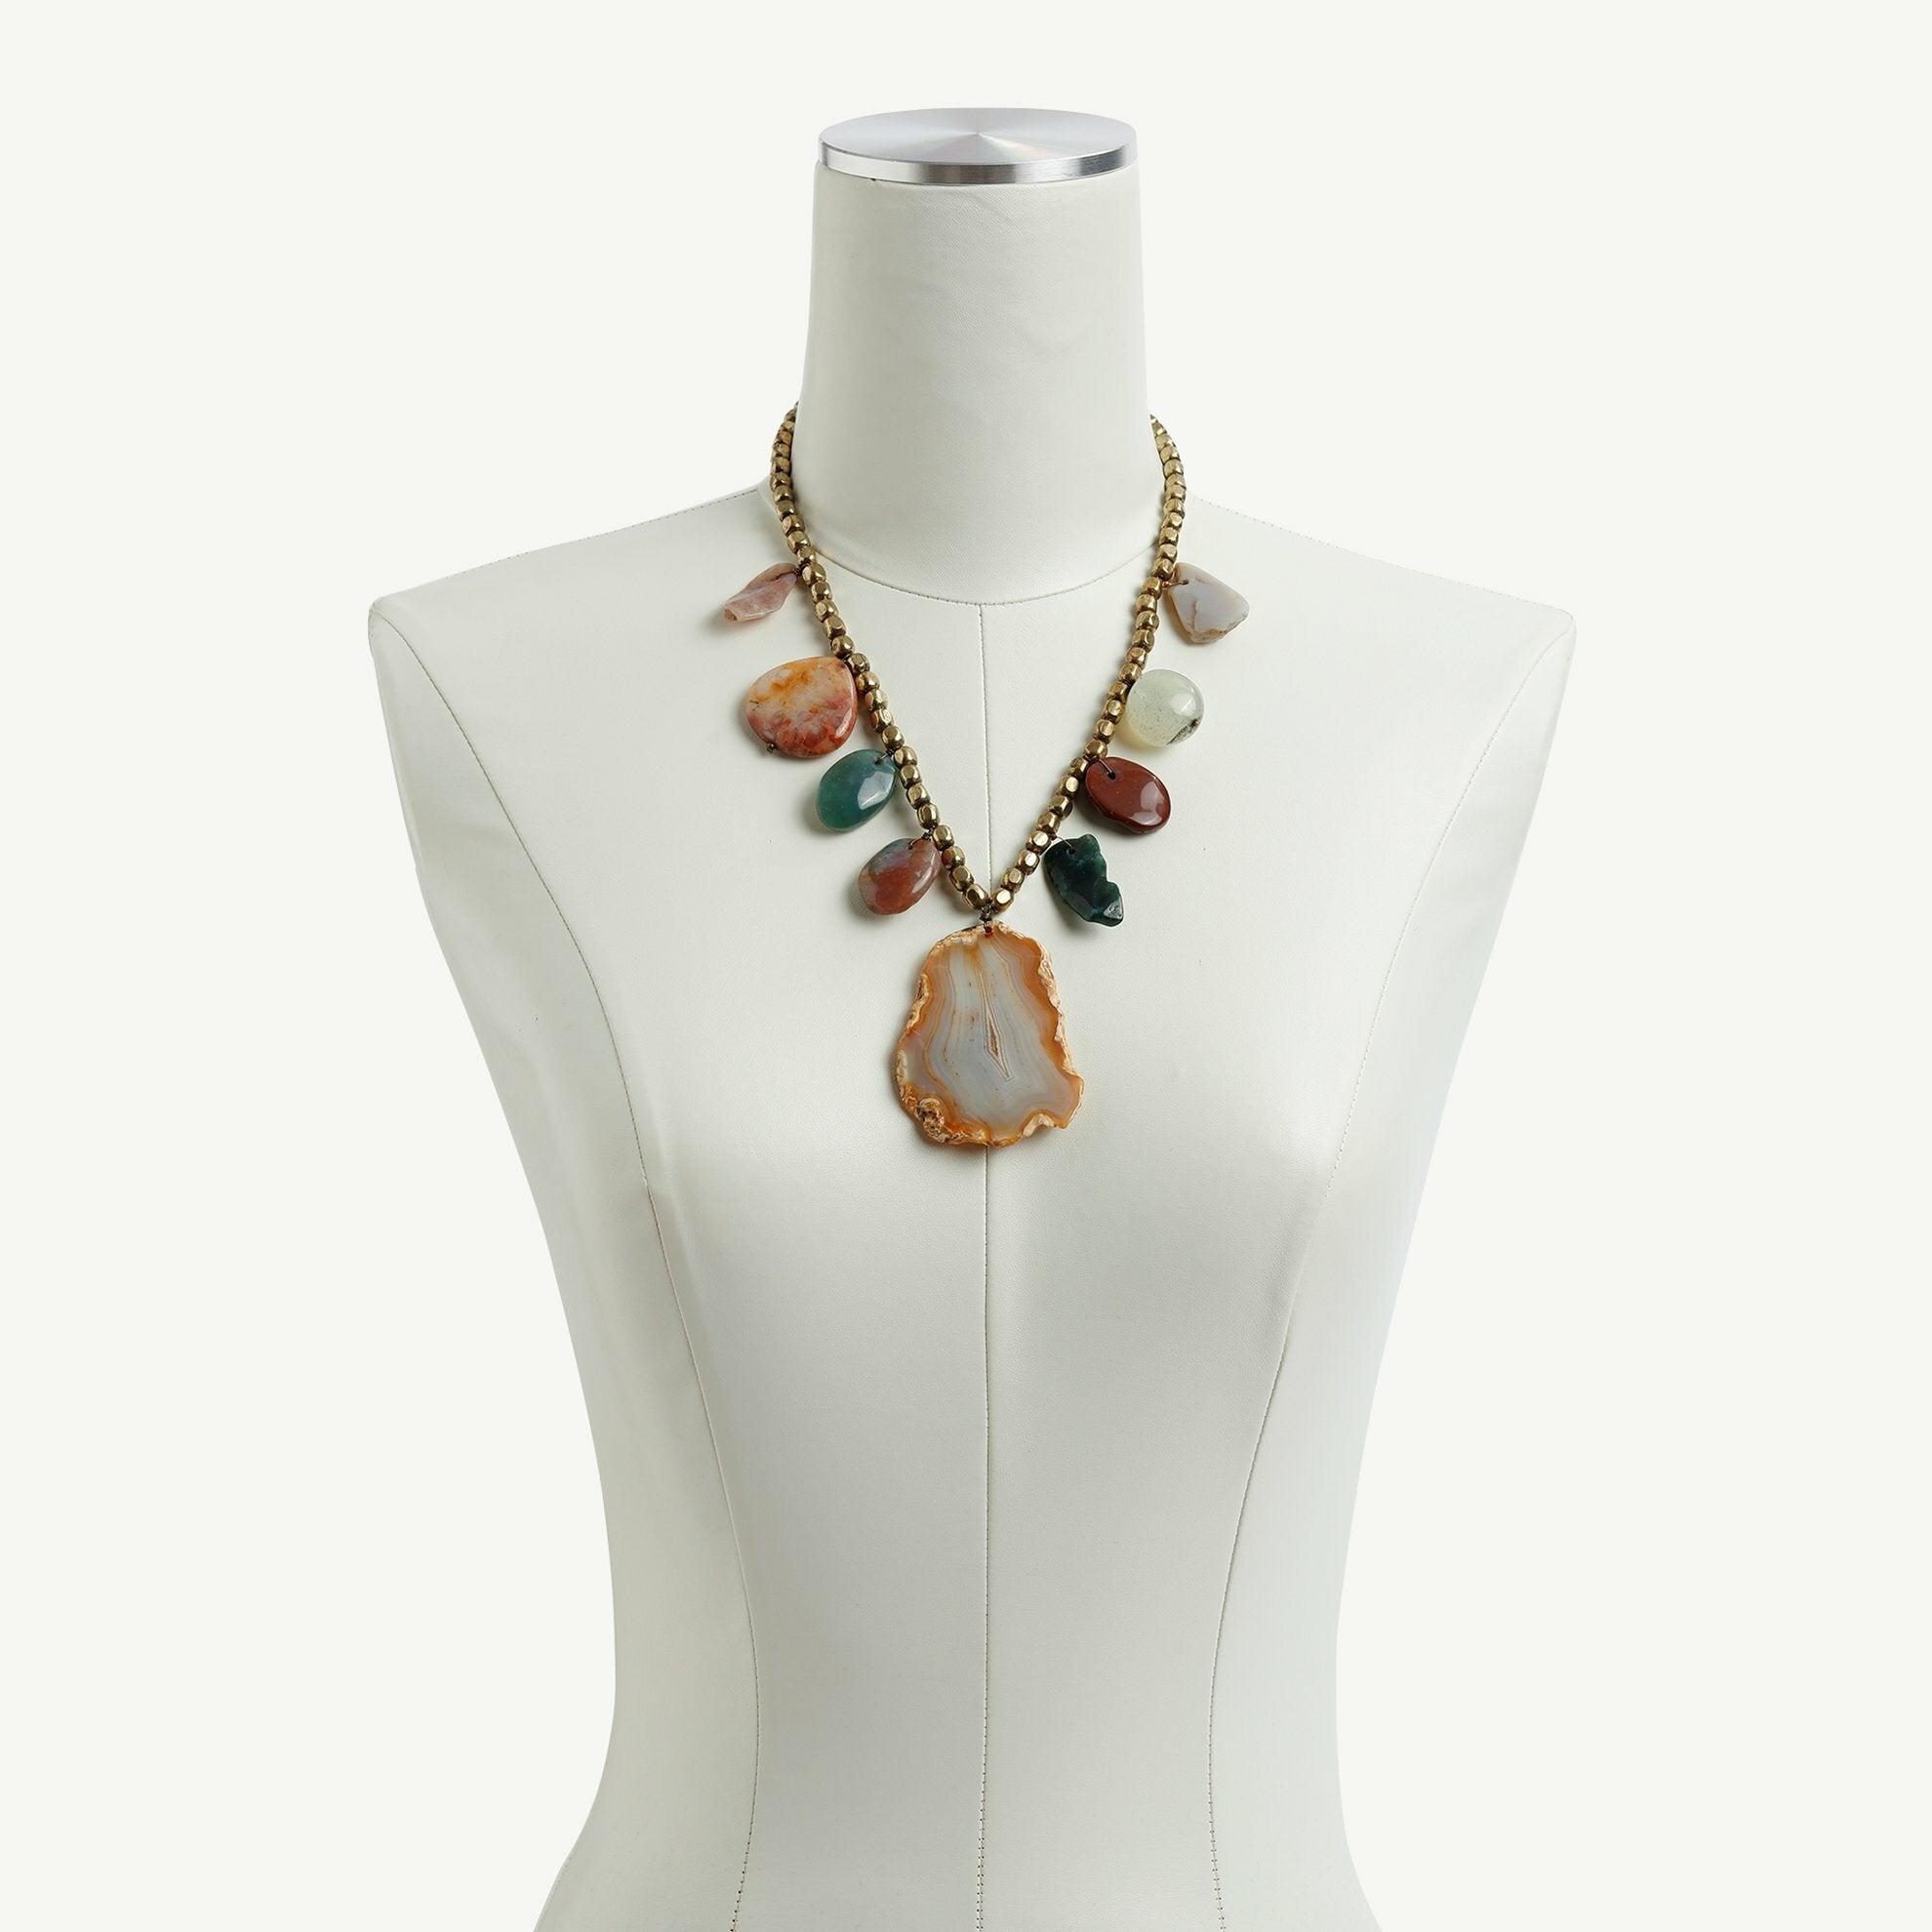 Natural stone necklace on dress form.